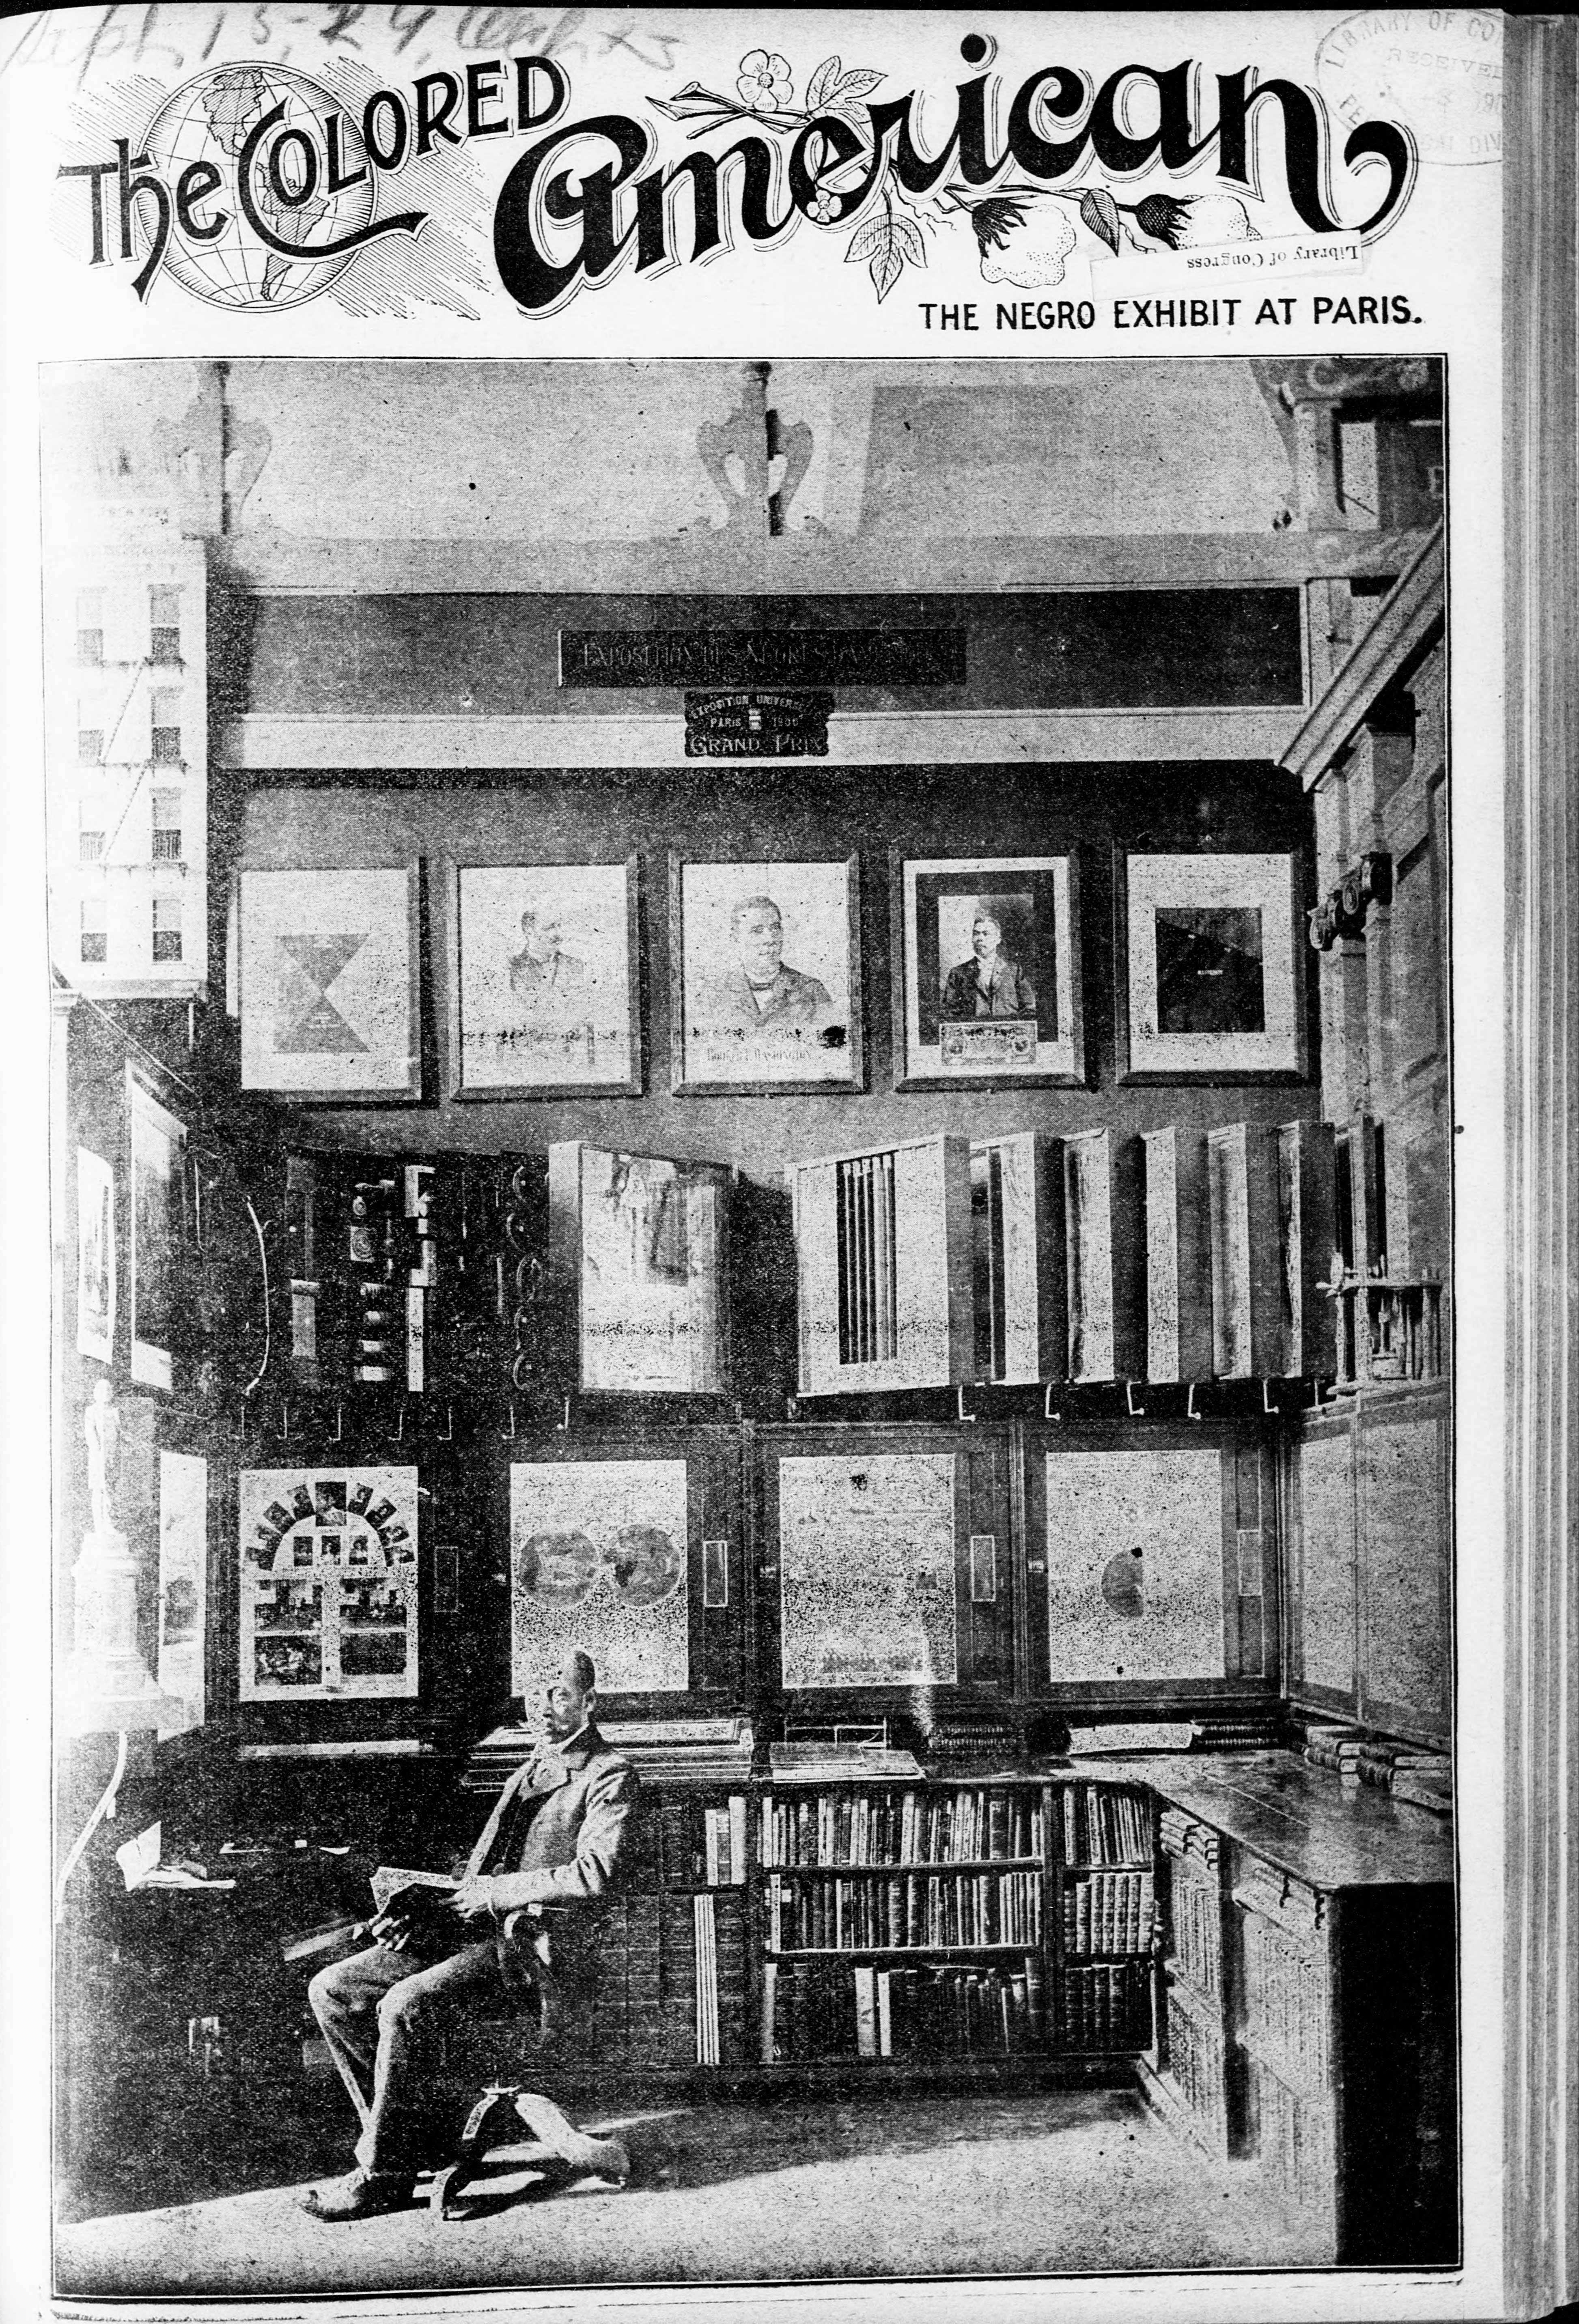 Black and white cover image of "The Colored American" periodical showing man sitting in chair in exhibition gallery.  Framed pictures hang on wall behind him as well as exhibition cases.  Book shelves filled with books are behind the man.